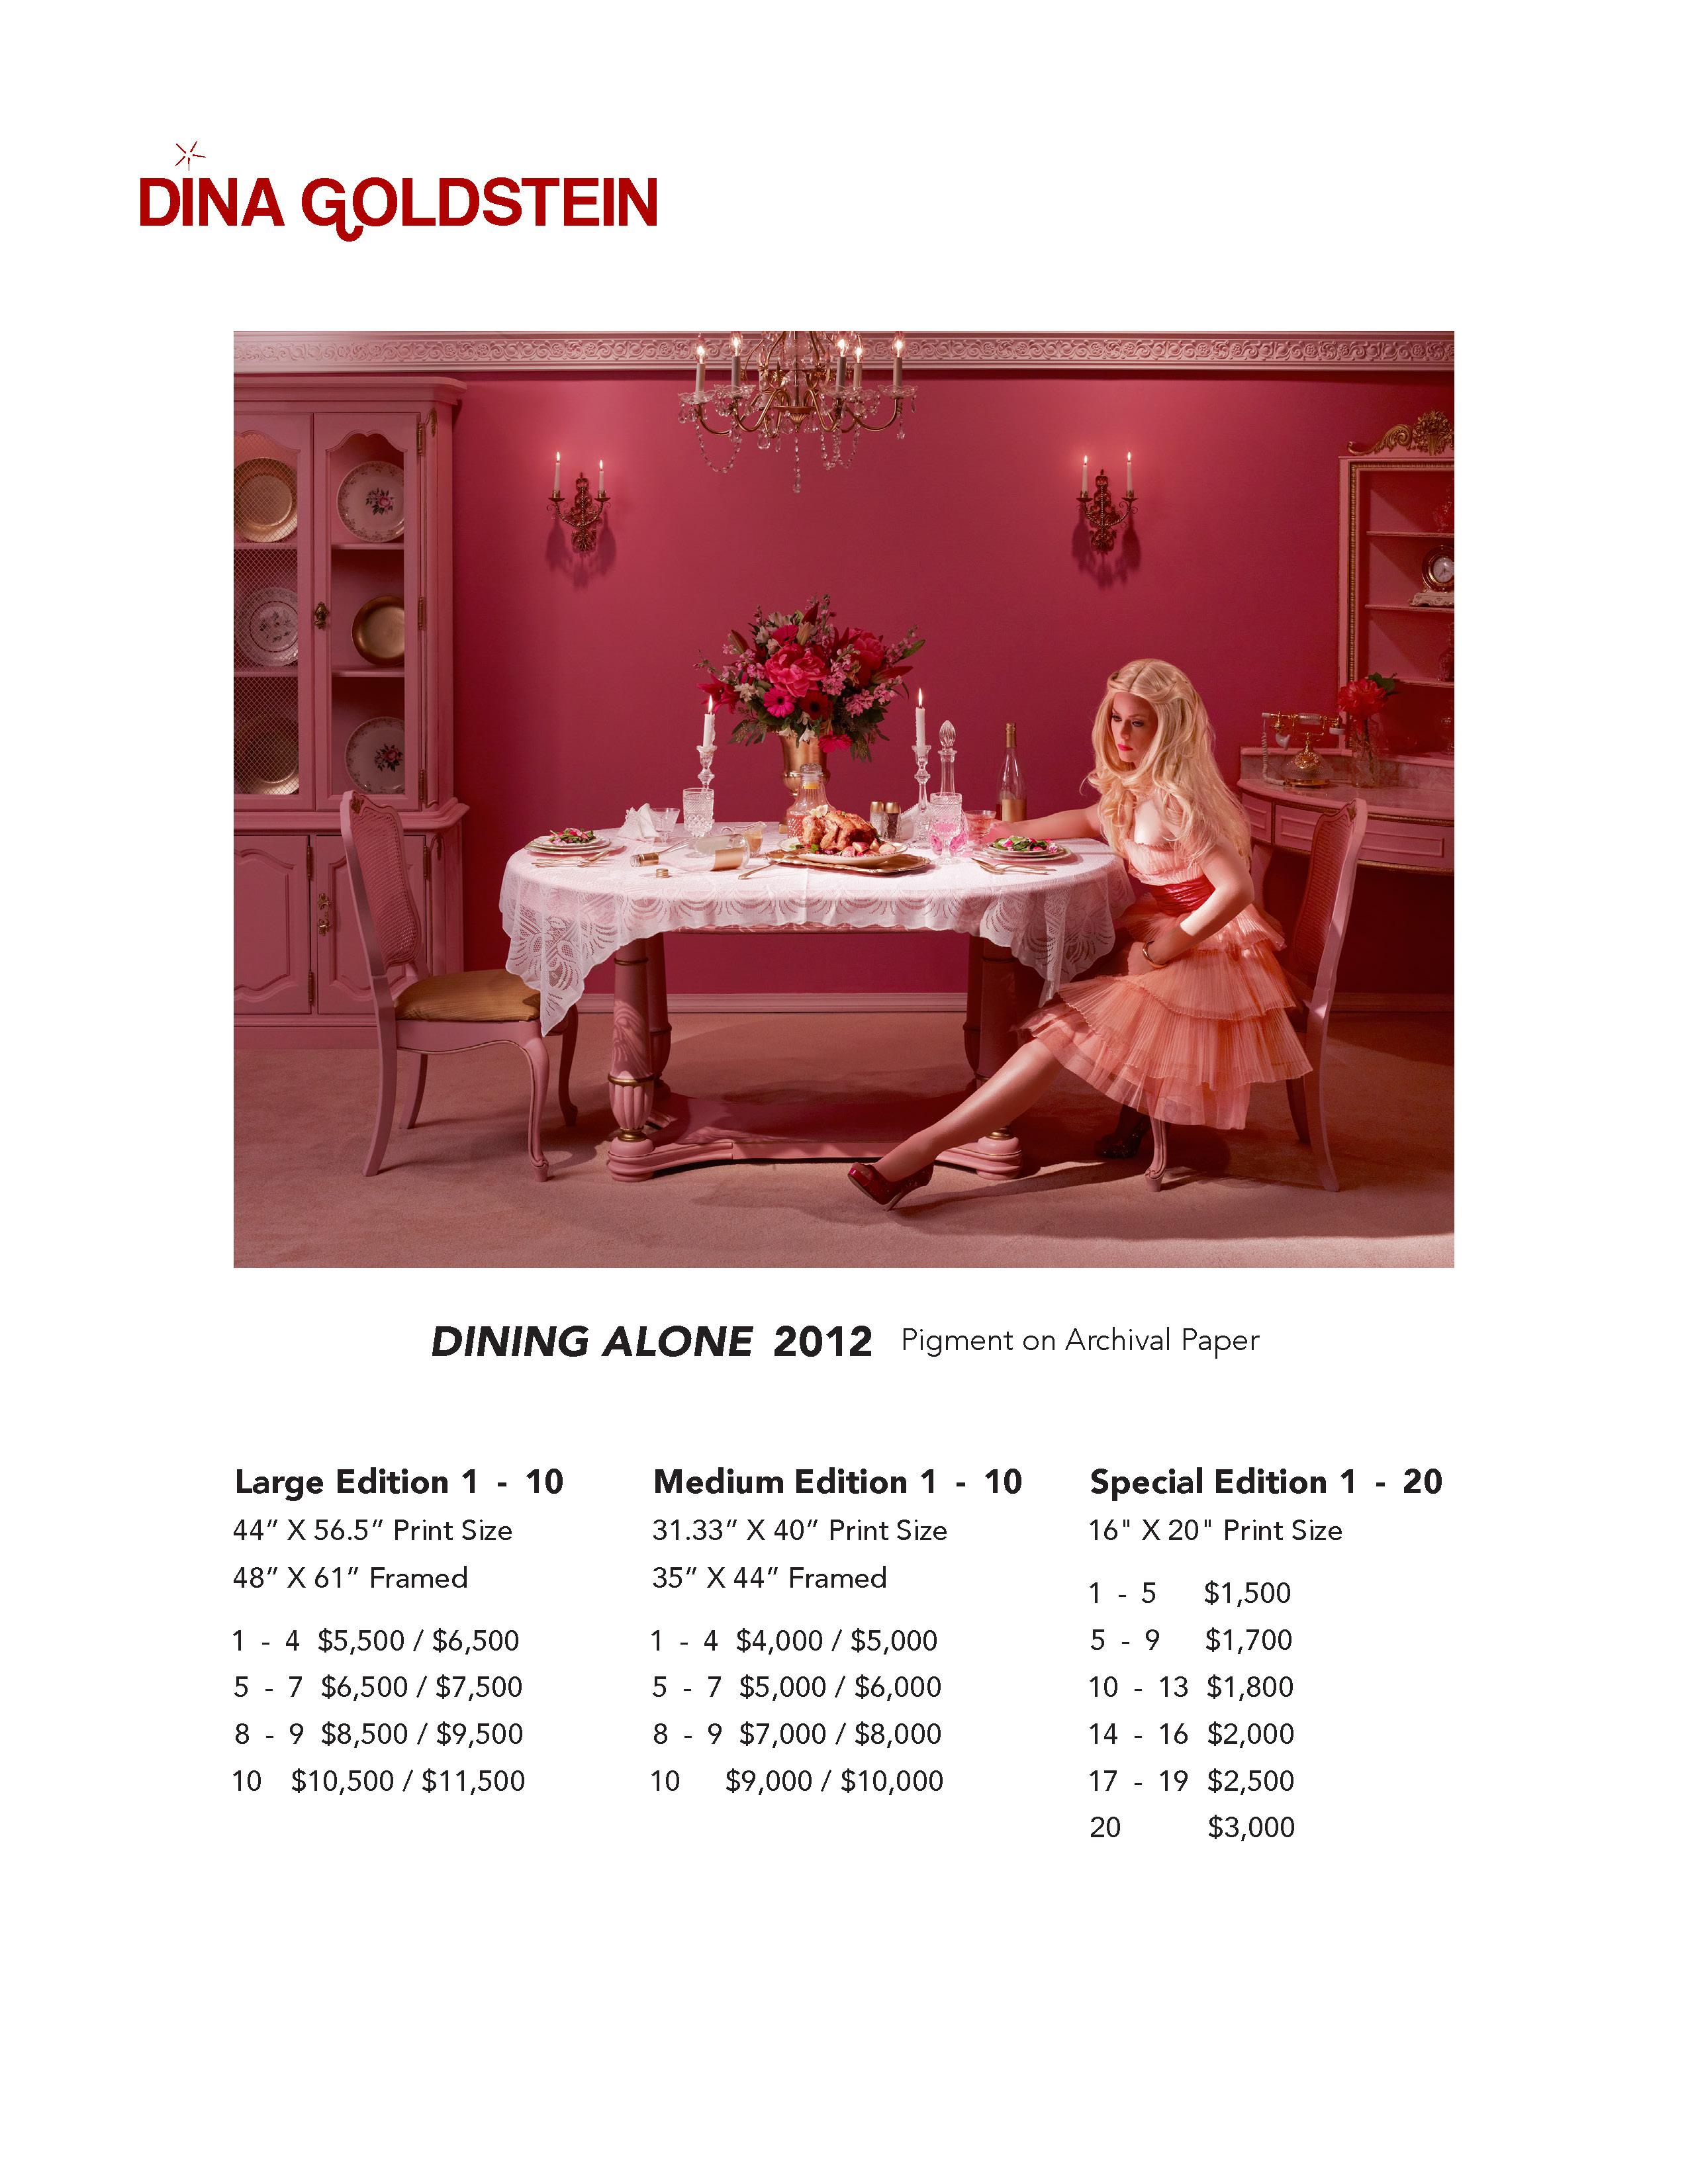 Dining Alone - Contemporary Photograph by Dina Goldstein